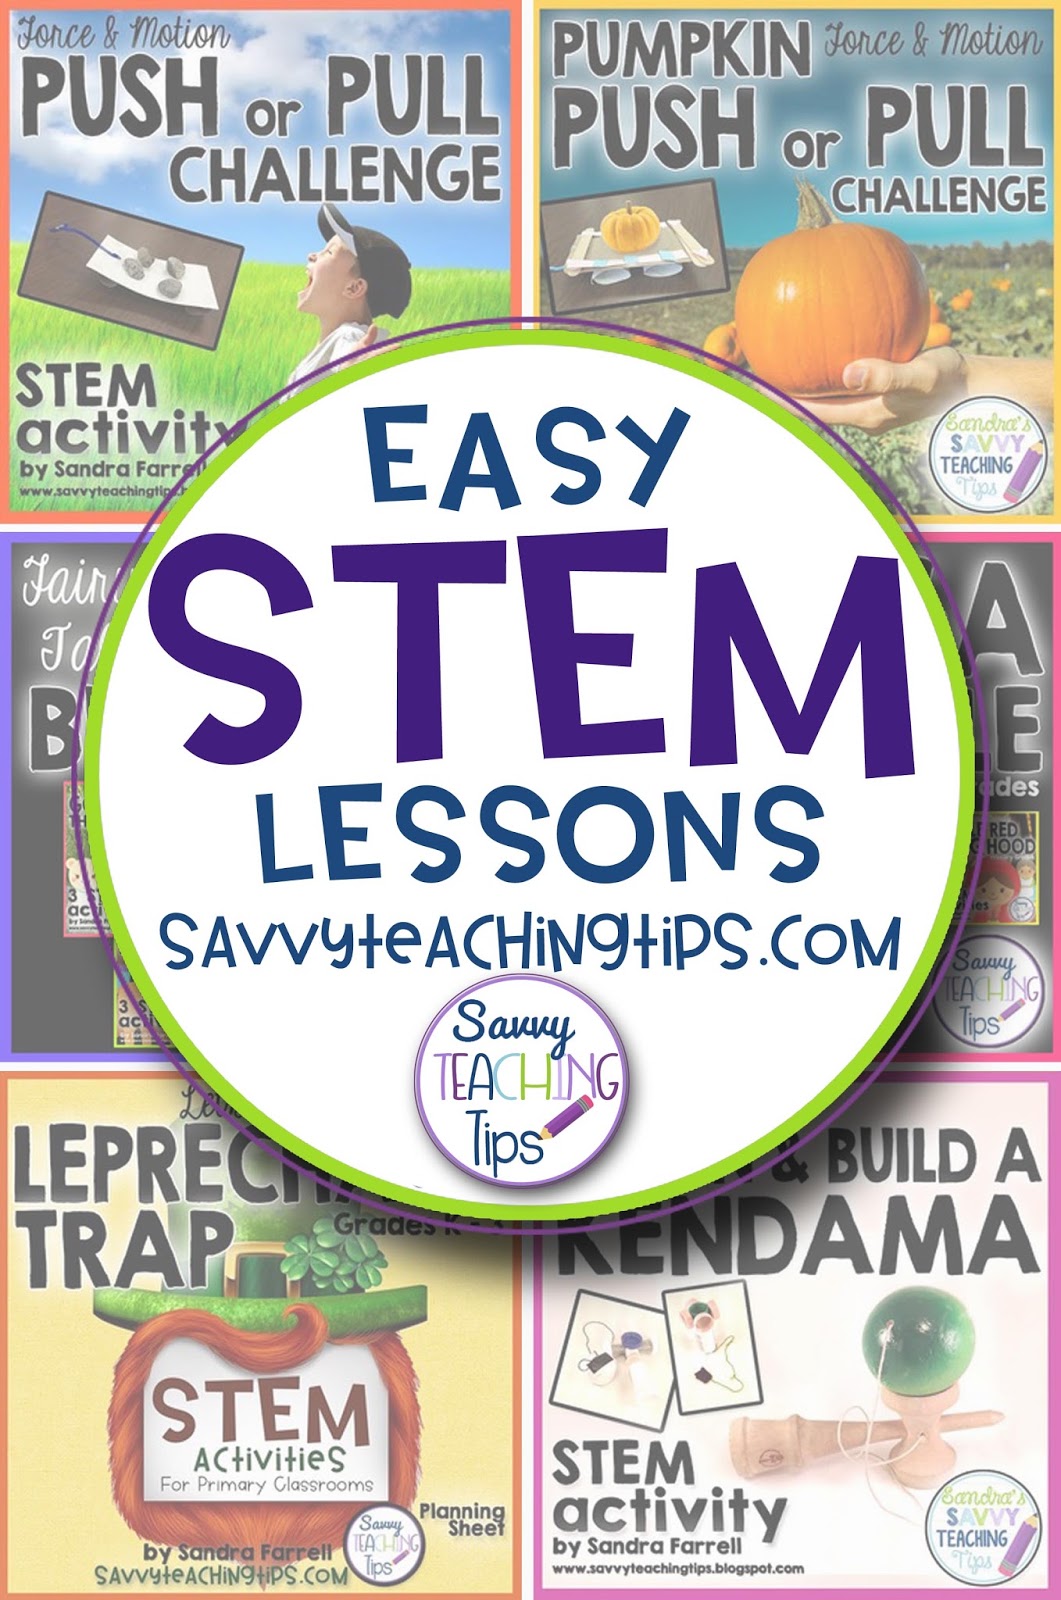 Never taught STEM before?  These step-by-step lessons are great for teaching Science, Engineering, Technology and Math